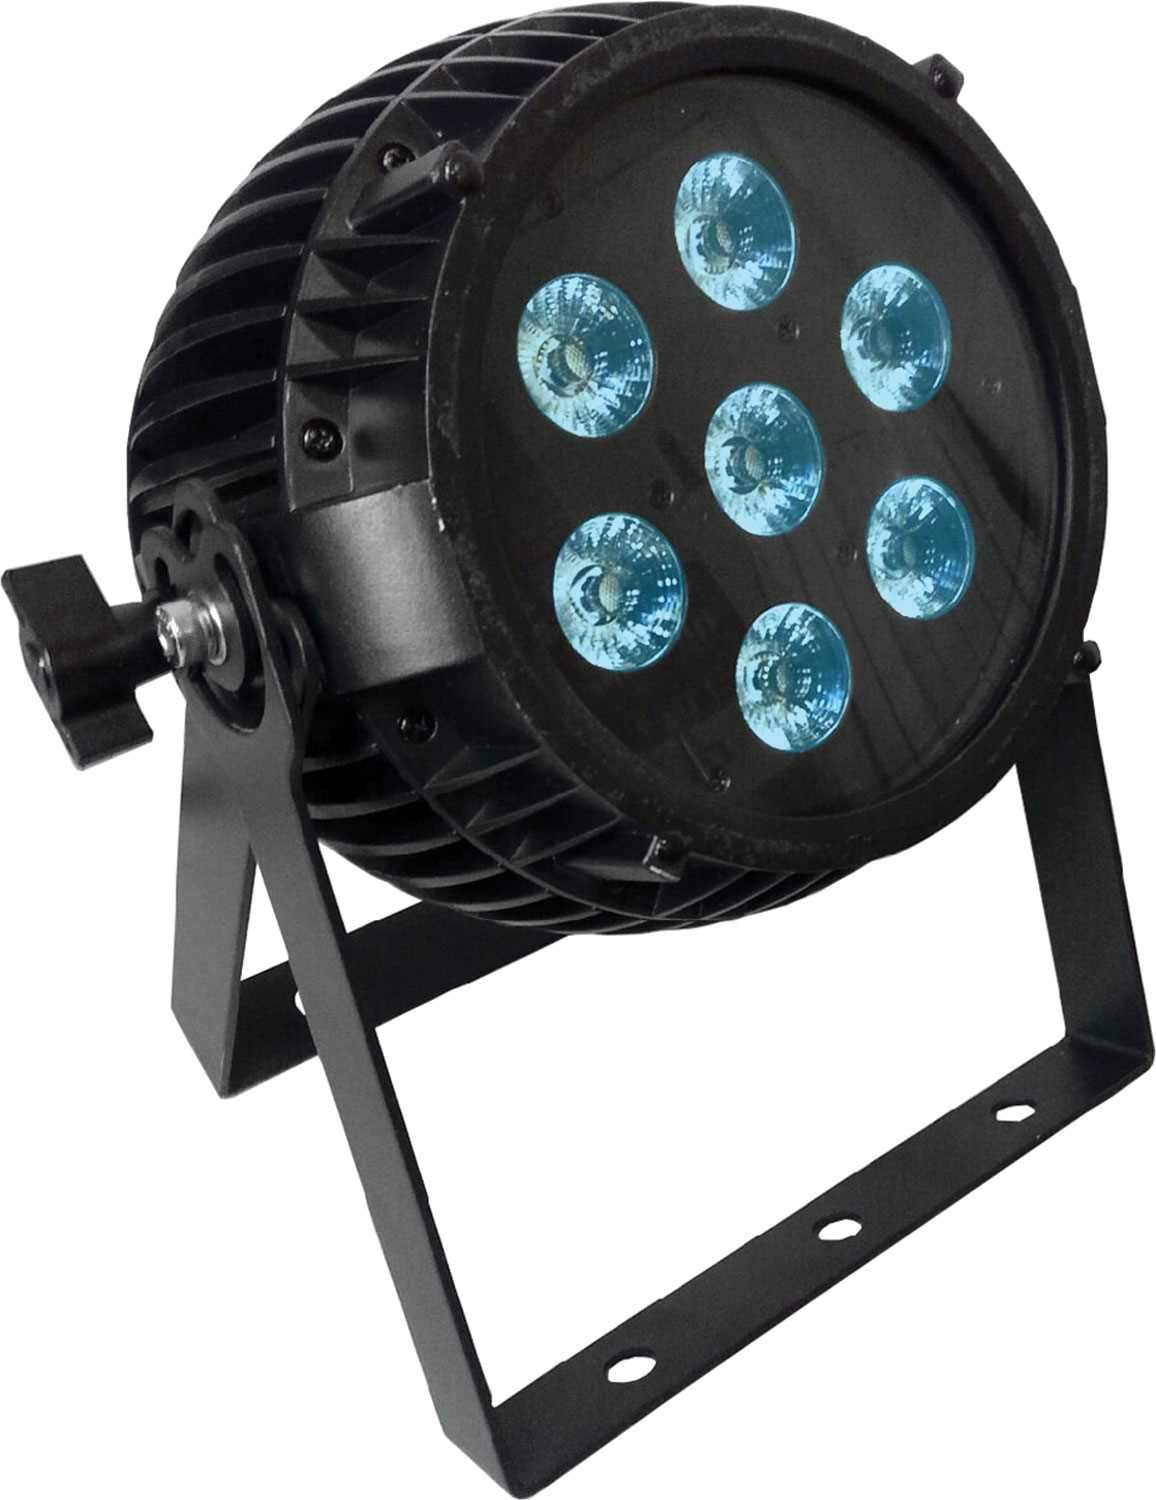 Blizzard Colorise Sky 7x15-Watt 6-in-1 LED Wash Light - ProSound and Stage Lighting